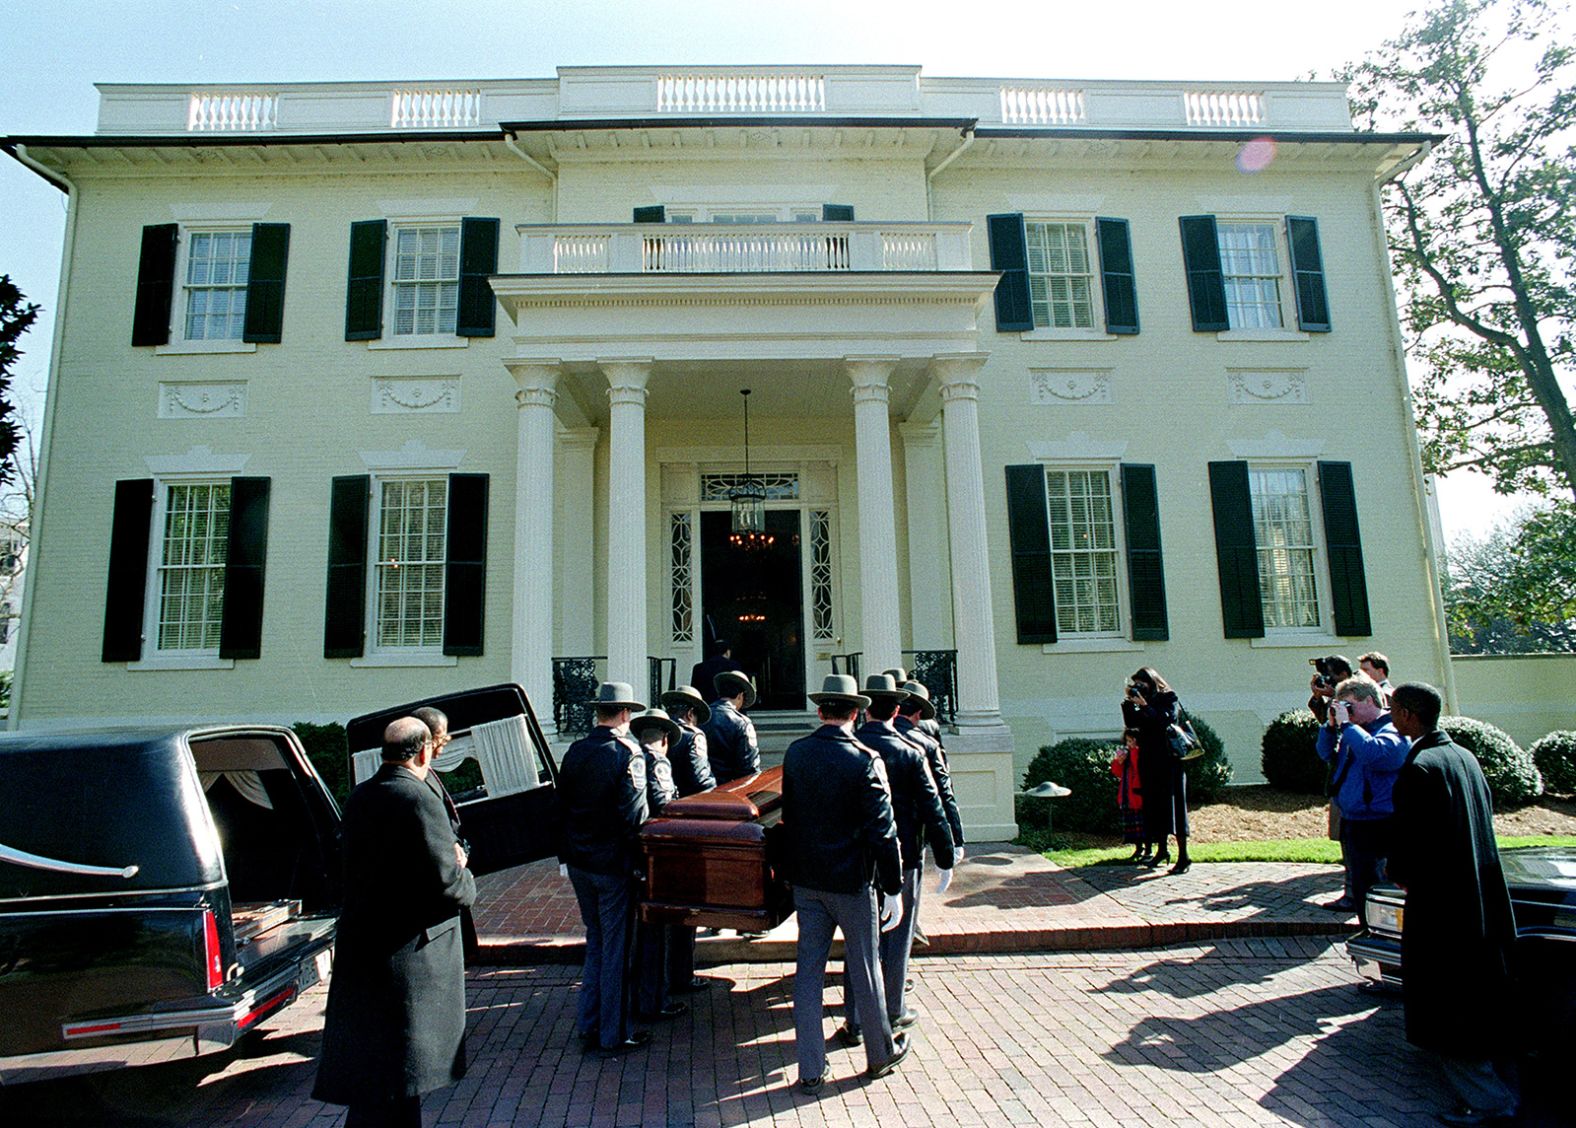 Ashe's casket is carried into the Governor's Mansion in his hometown of Richmond, Virginia, in 1993. A few days earlier, Ashe had died of AIDS-related pneumonia. He was 49 years old. Among those on the right is his widow, Jeanne, a professional photographer. She is with their daughter.